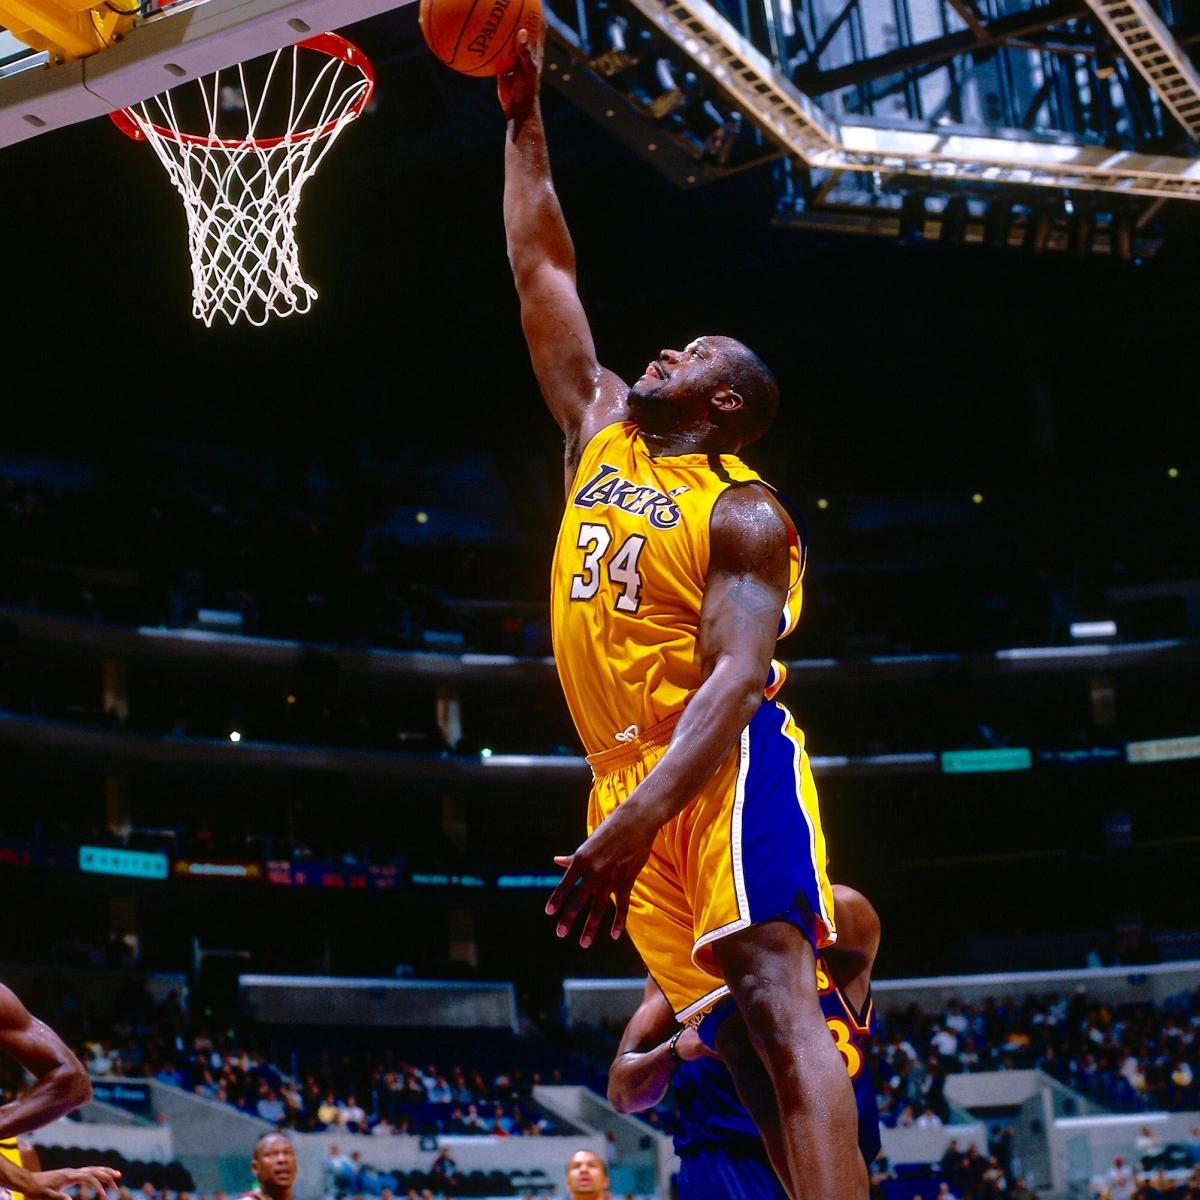 NBA 75: At No. 8, Shaquille O'Neal was a dominant physical force